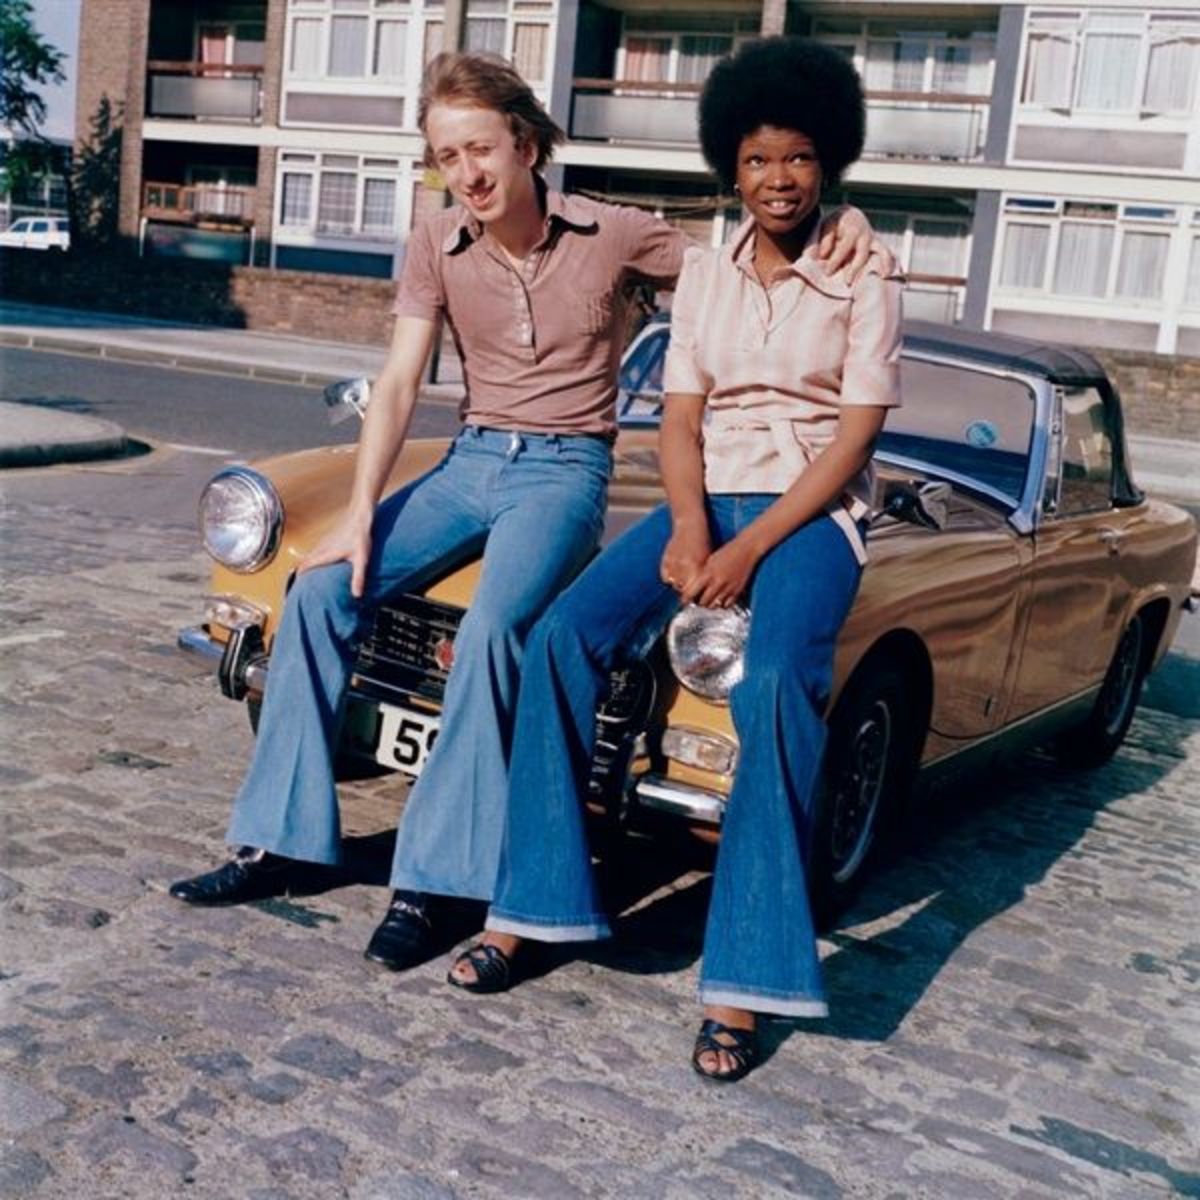 interracial dating in the 1970s